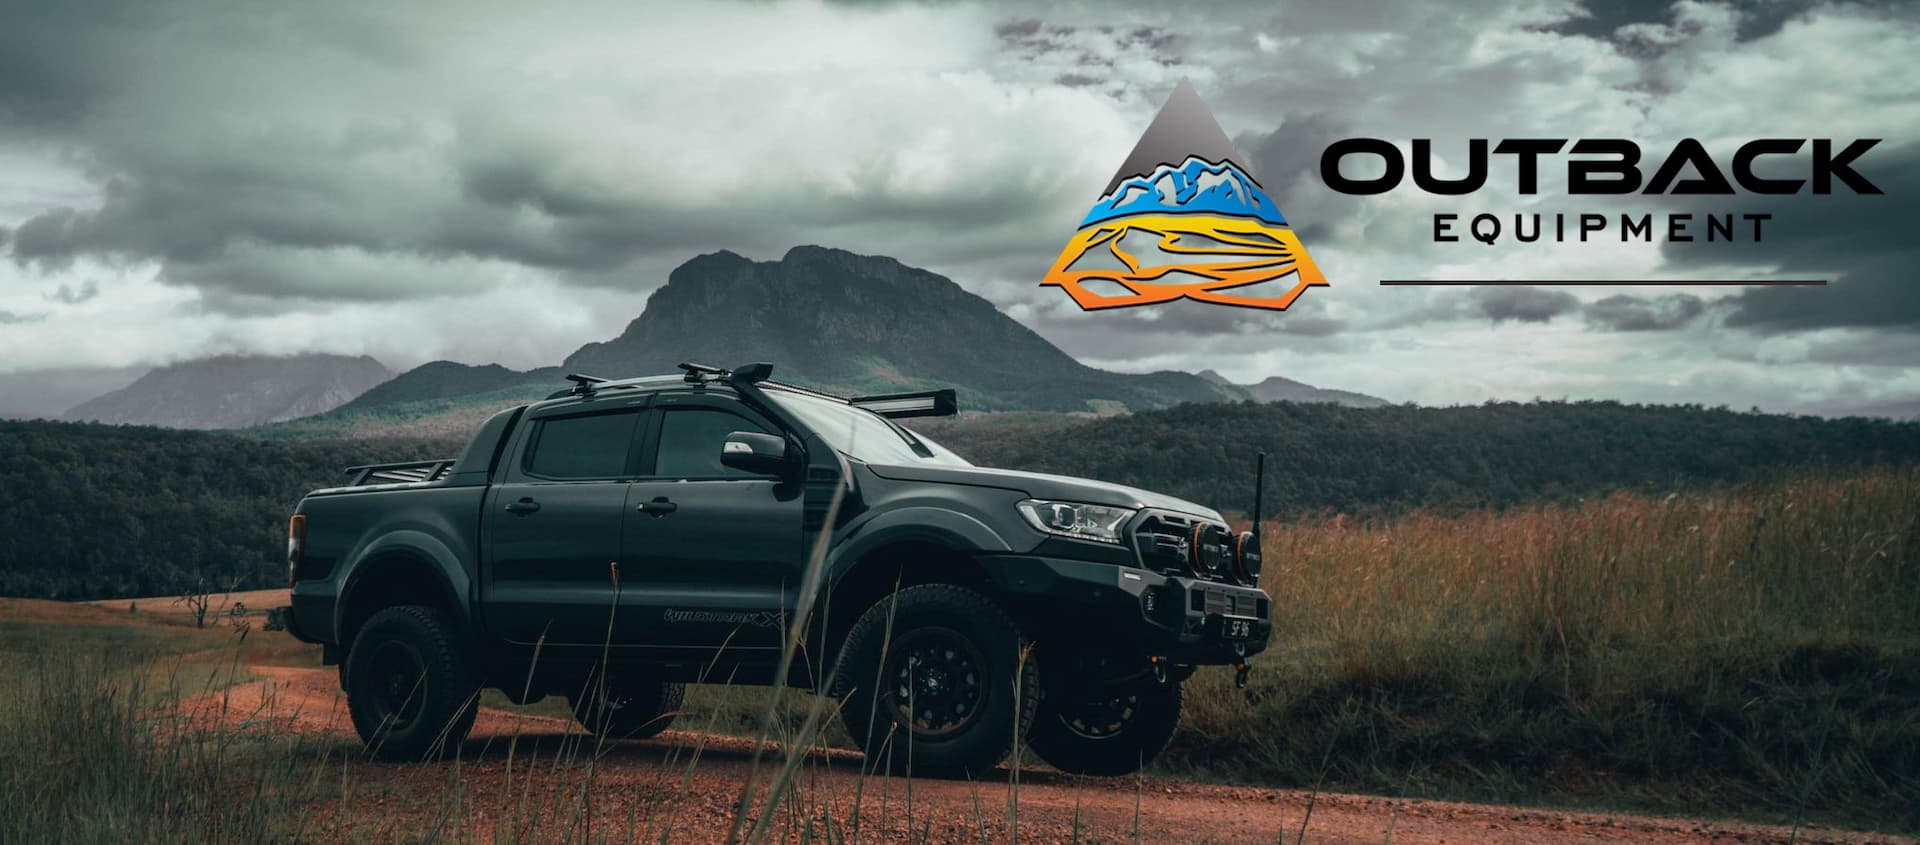 All Outback Equipment Australia Daily Quick Deals